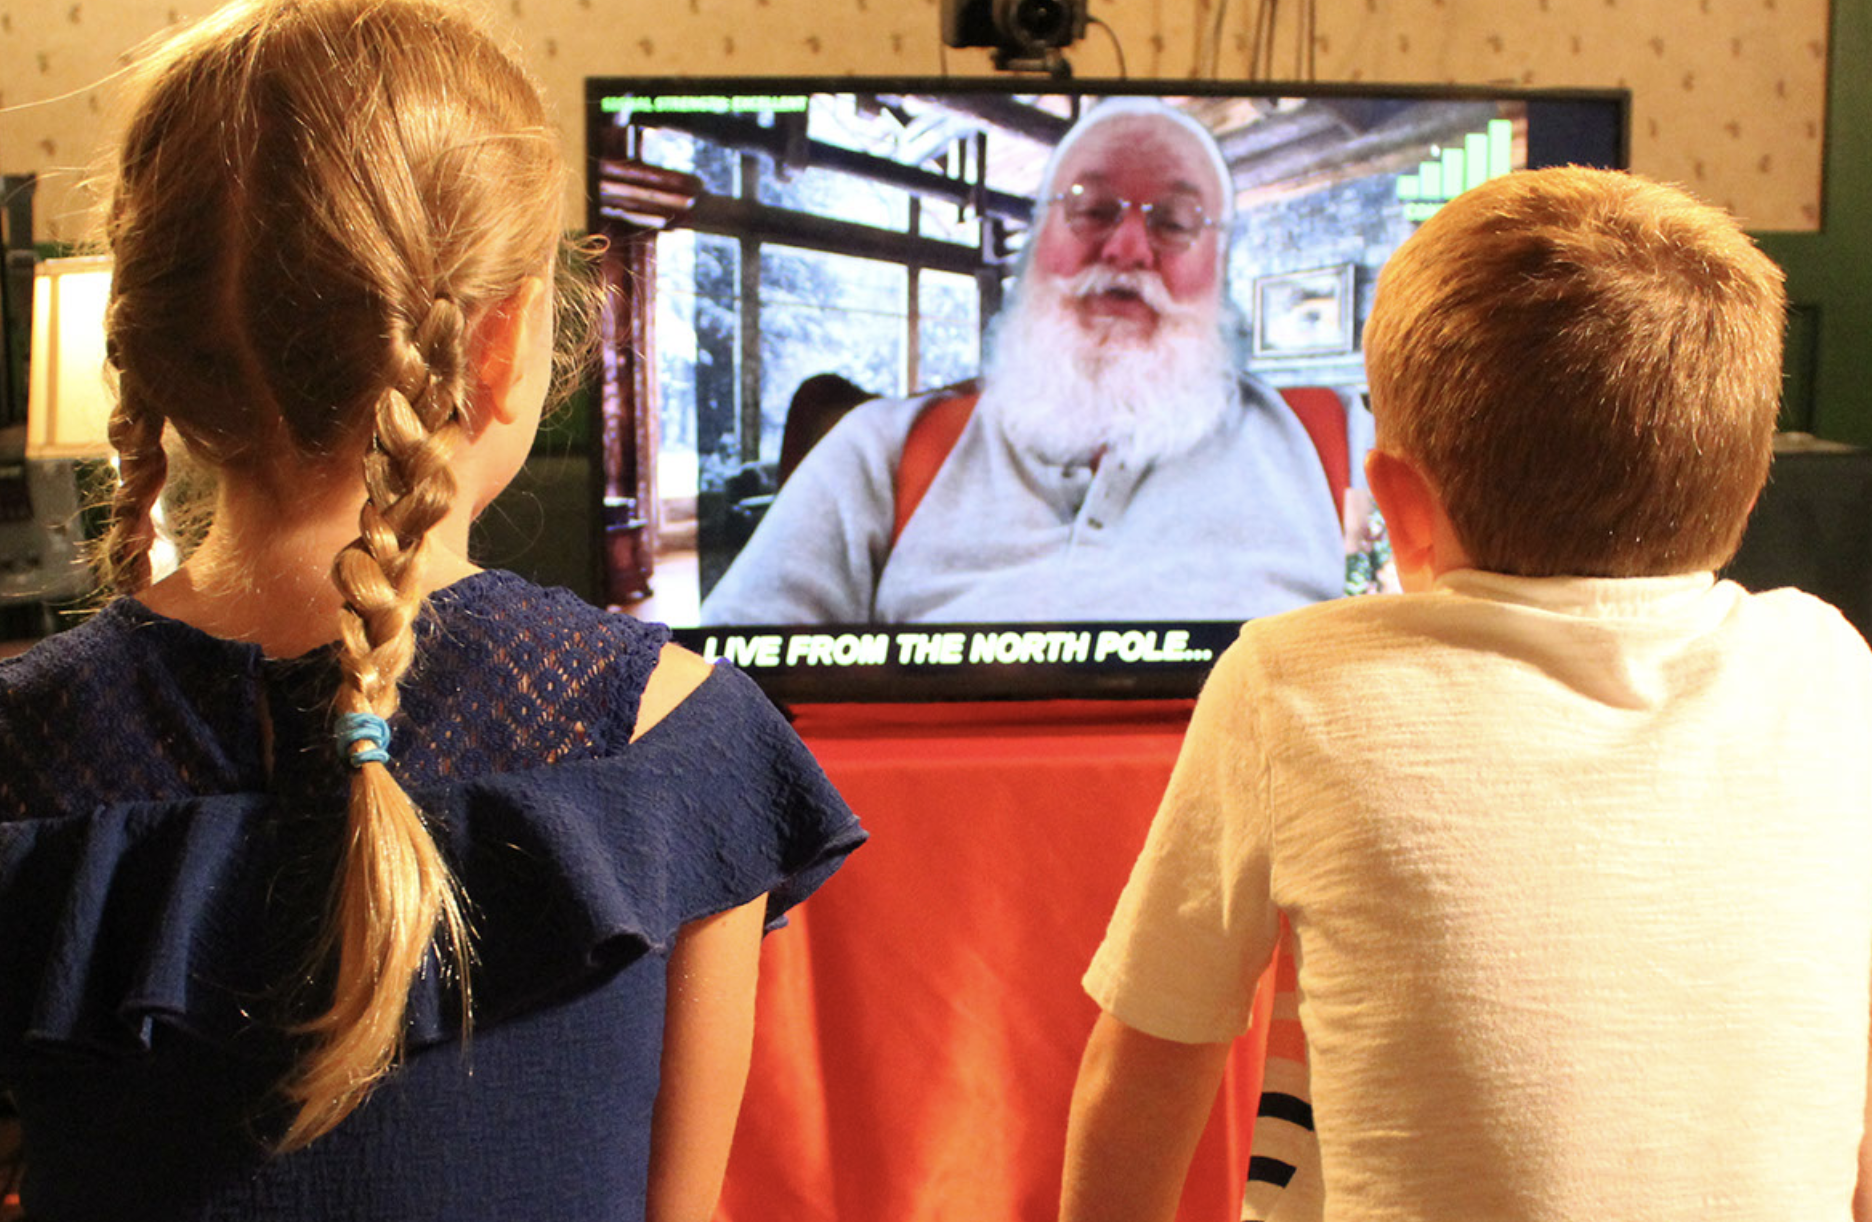 video chat with Santa